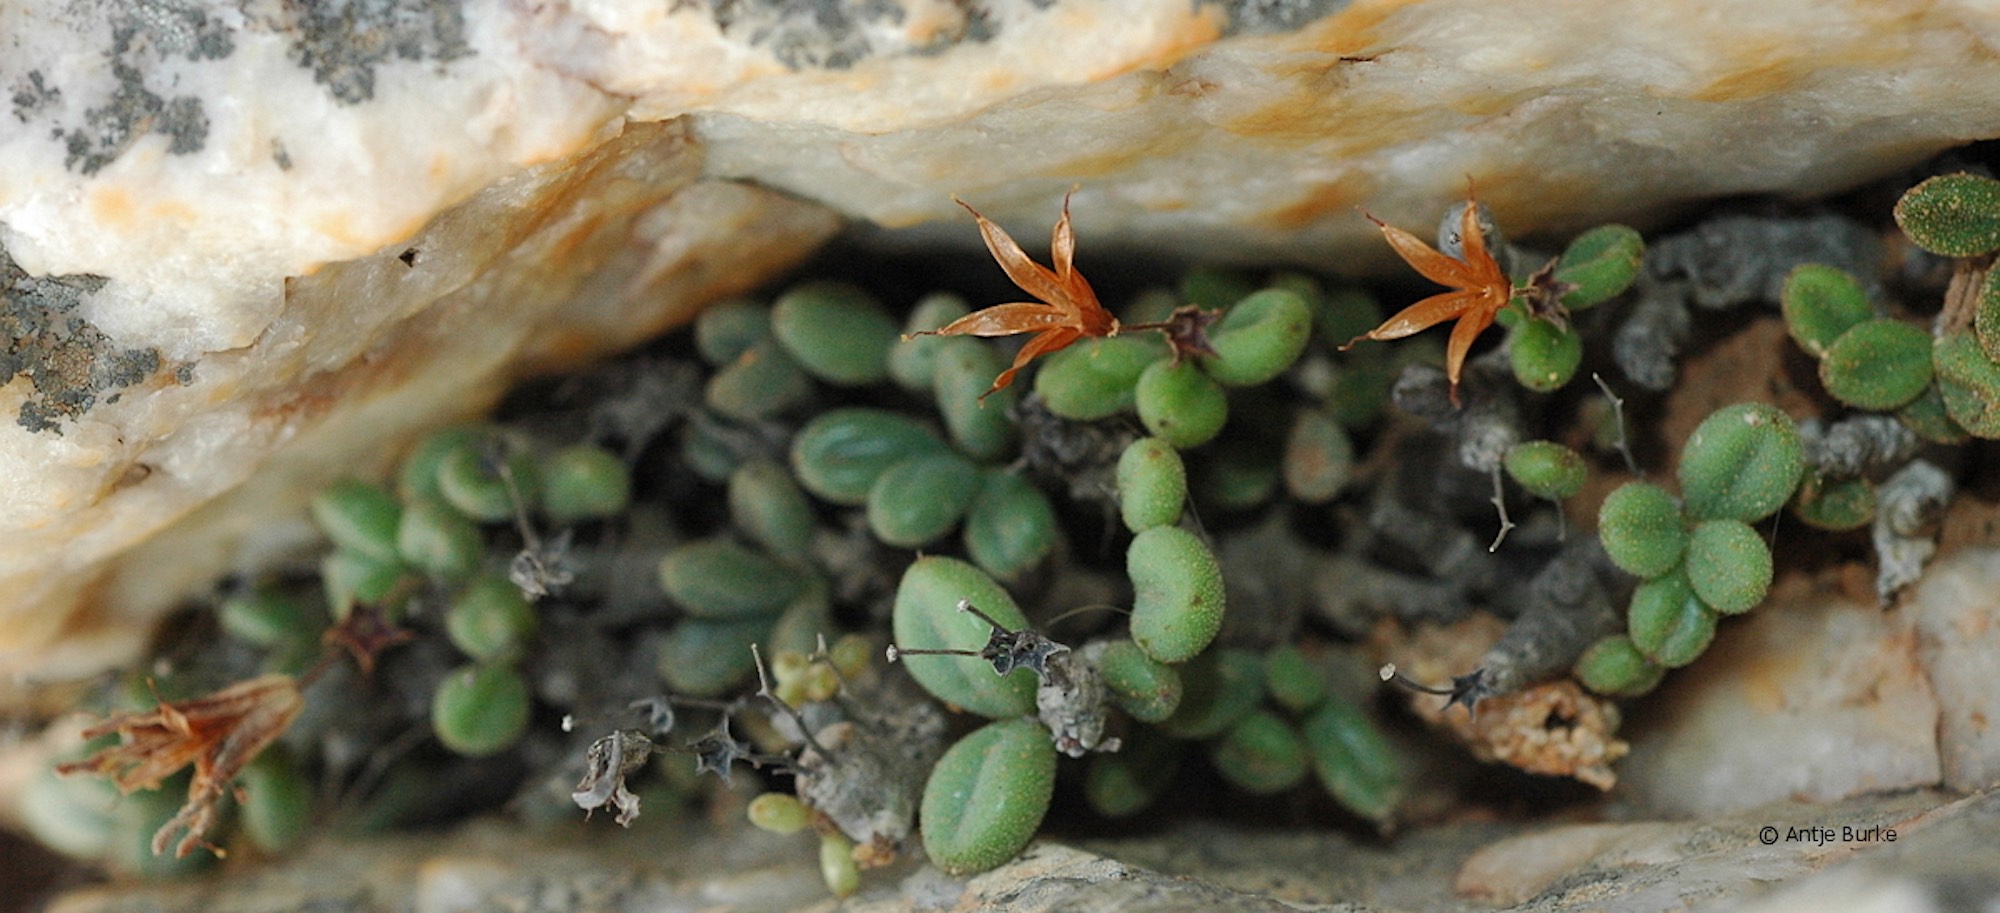 Green succulent leaves peer out from a rocky enclosure.